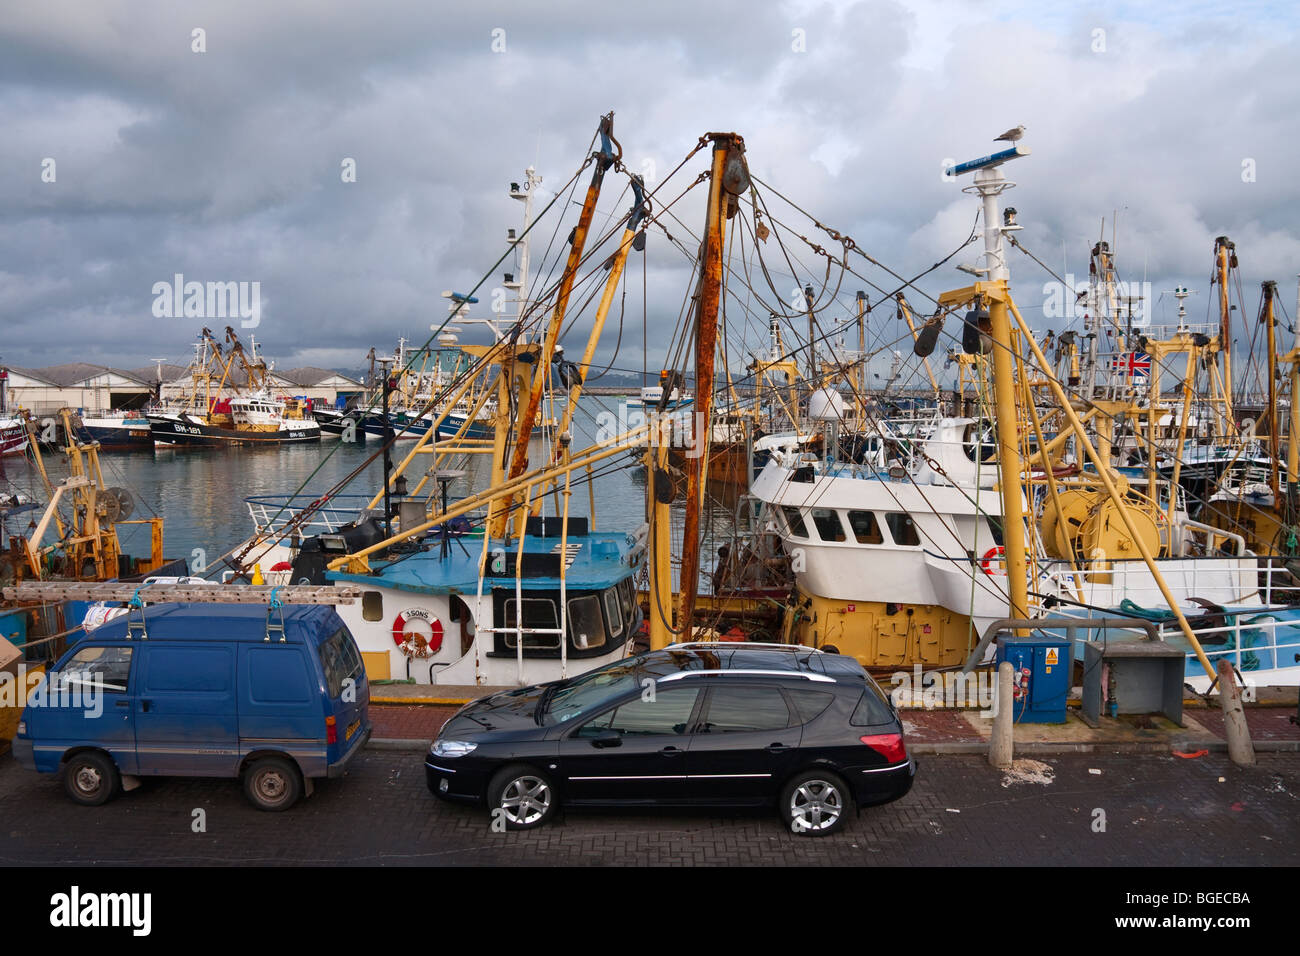 Fishing trawlers moored up in 'Brixham harbour' Stock Photo